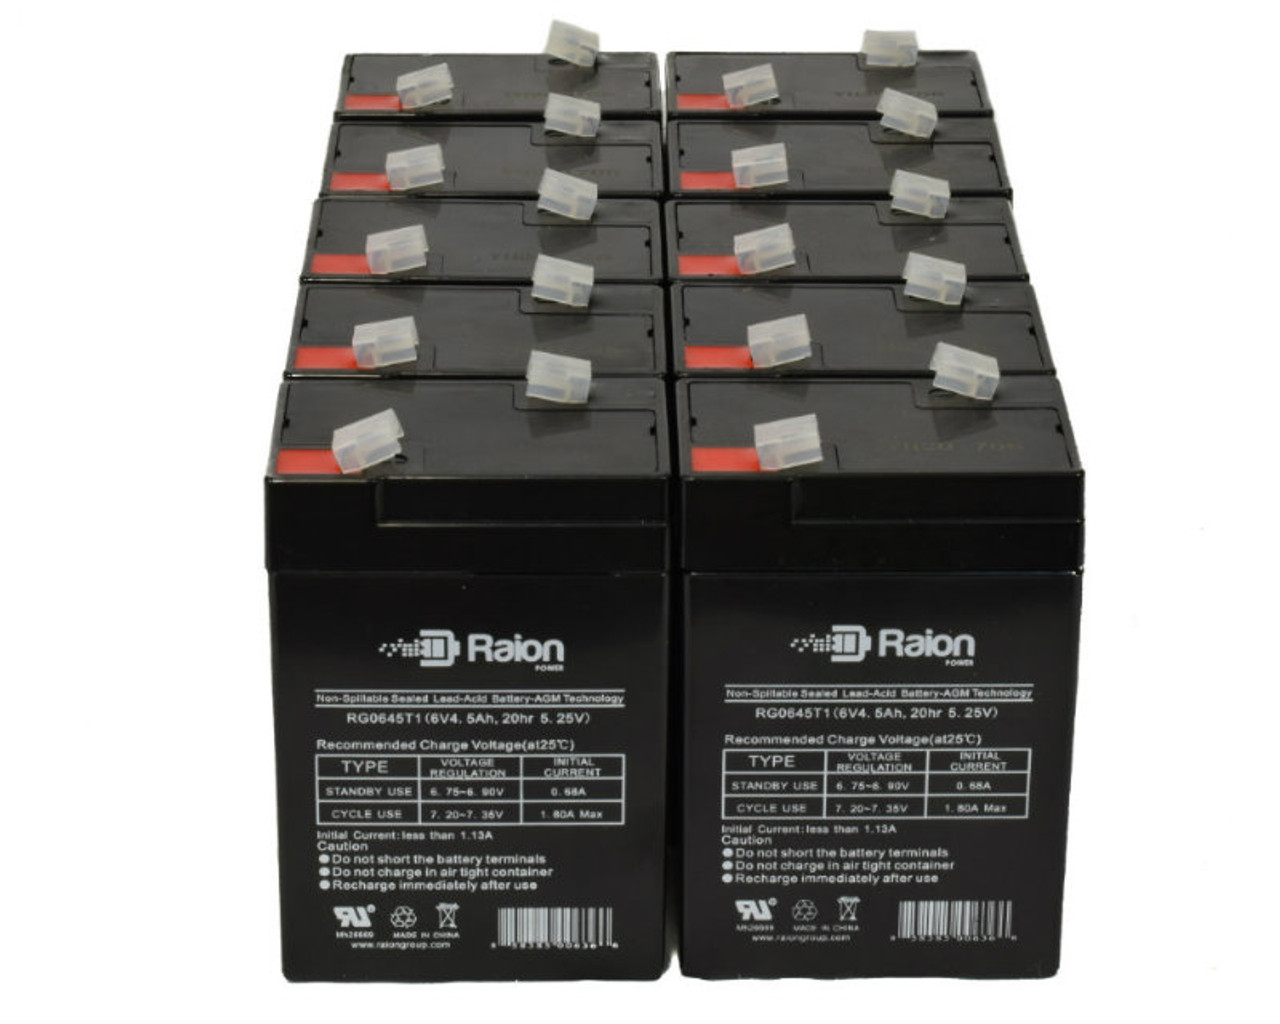 Raion Power 6 Volt 4.5Ah RG0645T1 Replacement Battery for Cellpower CP 4-6 - 10 Pack